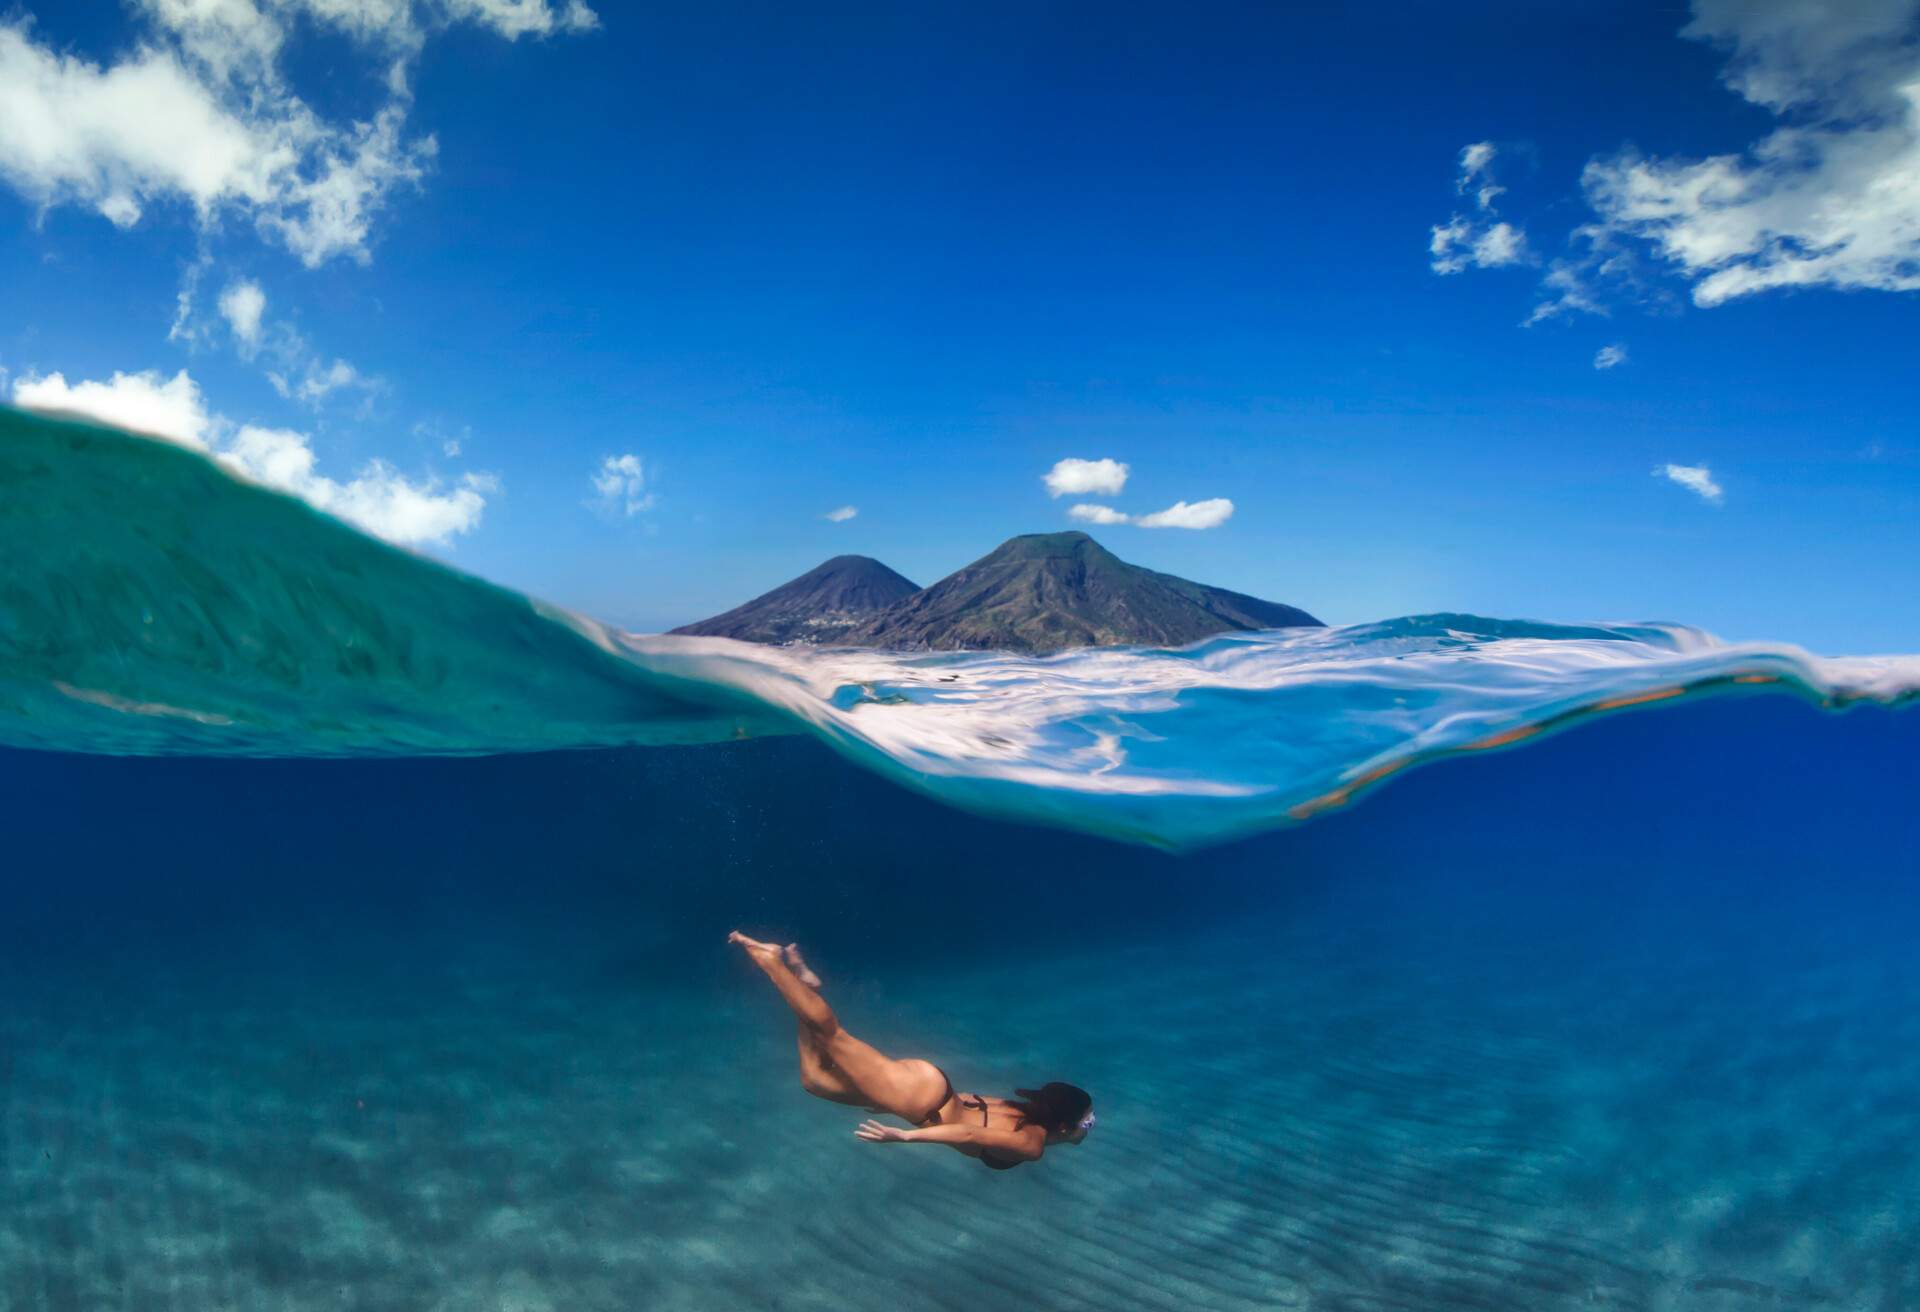 DEST_ITALY_SICILY_AEOLIAN-ISLANDS_SALINA_THEME_SNORKELLING-VOLCANO_GettyImages-1173139047